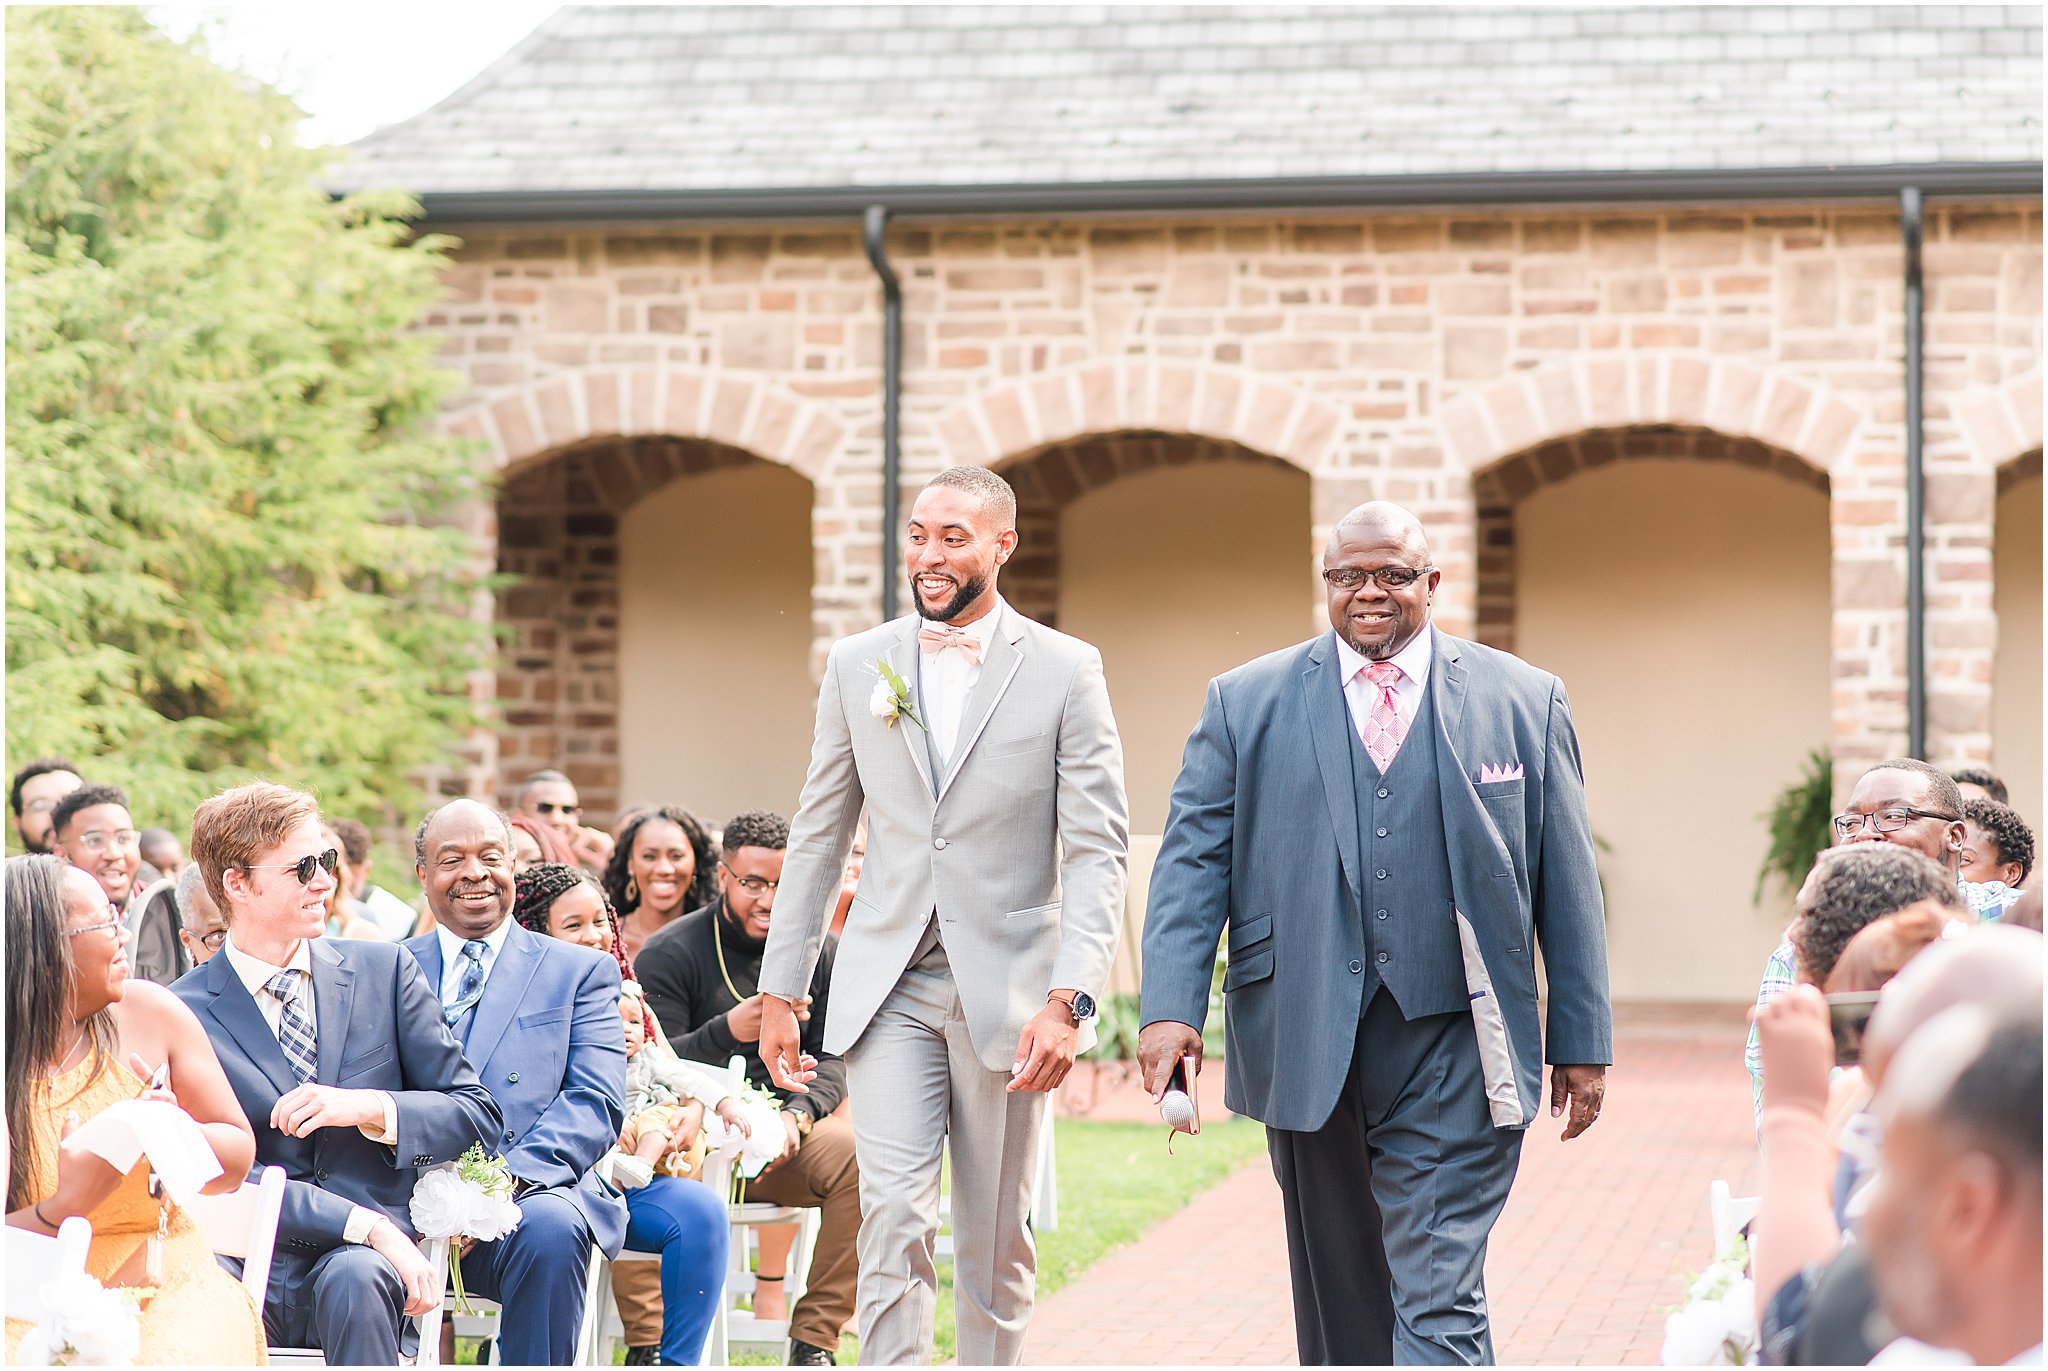 Groom walking down the aisle during outdoor ceremony at Pinnacle Golf Club | Courtney Carney Photography